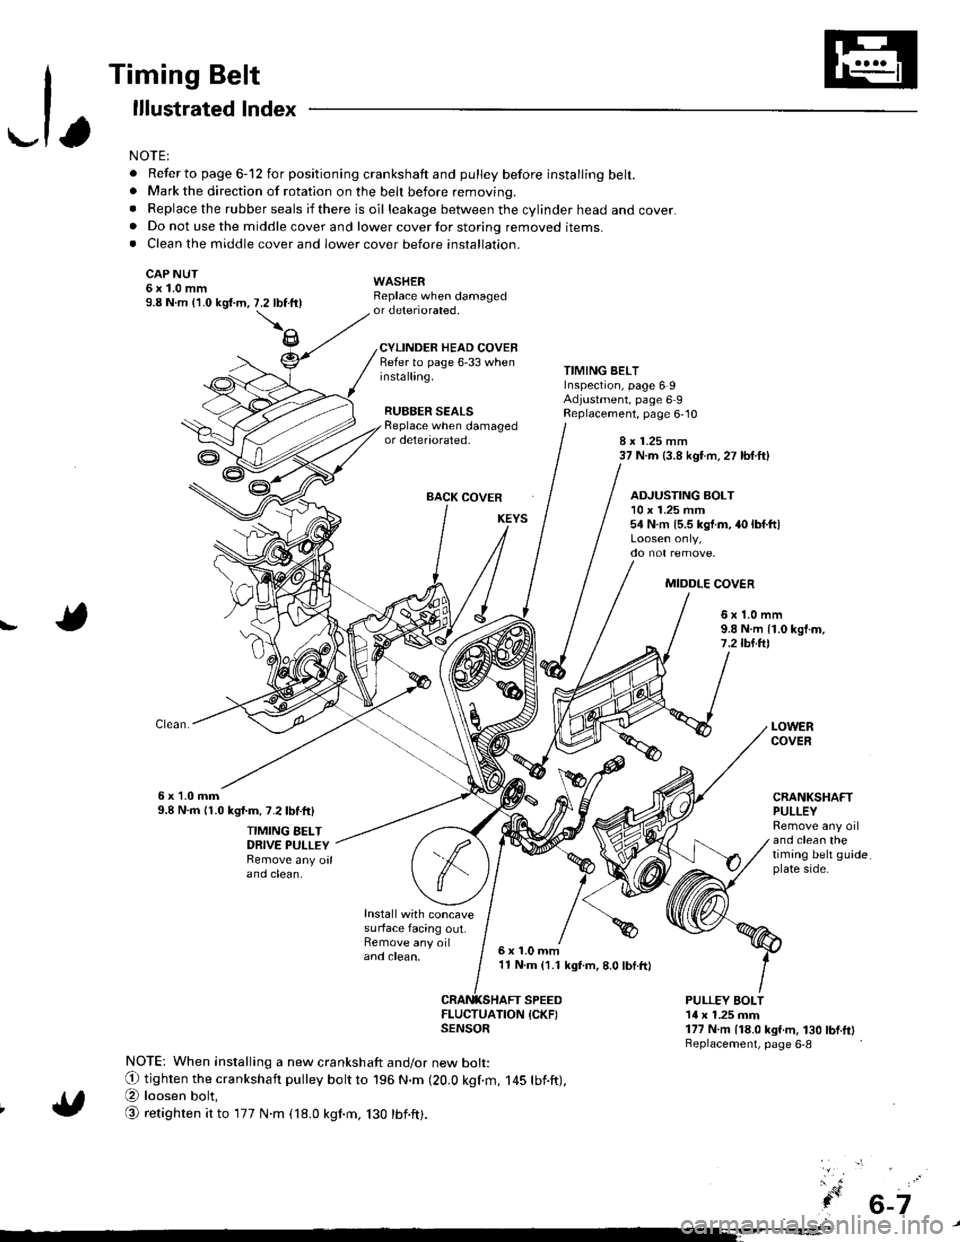 HONDA INTEGRA 1998 4.G Repair Manual -1,
Timing Belt
lllustrated lndex
NOTE:
. Refer to page 6-12 for positioning crankshaft and pulley before installing belt.. Mark the direction of rotation on the beh before removing.
. Replace the rub